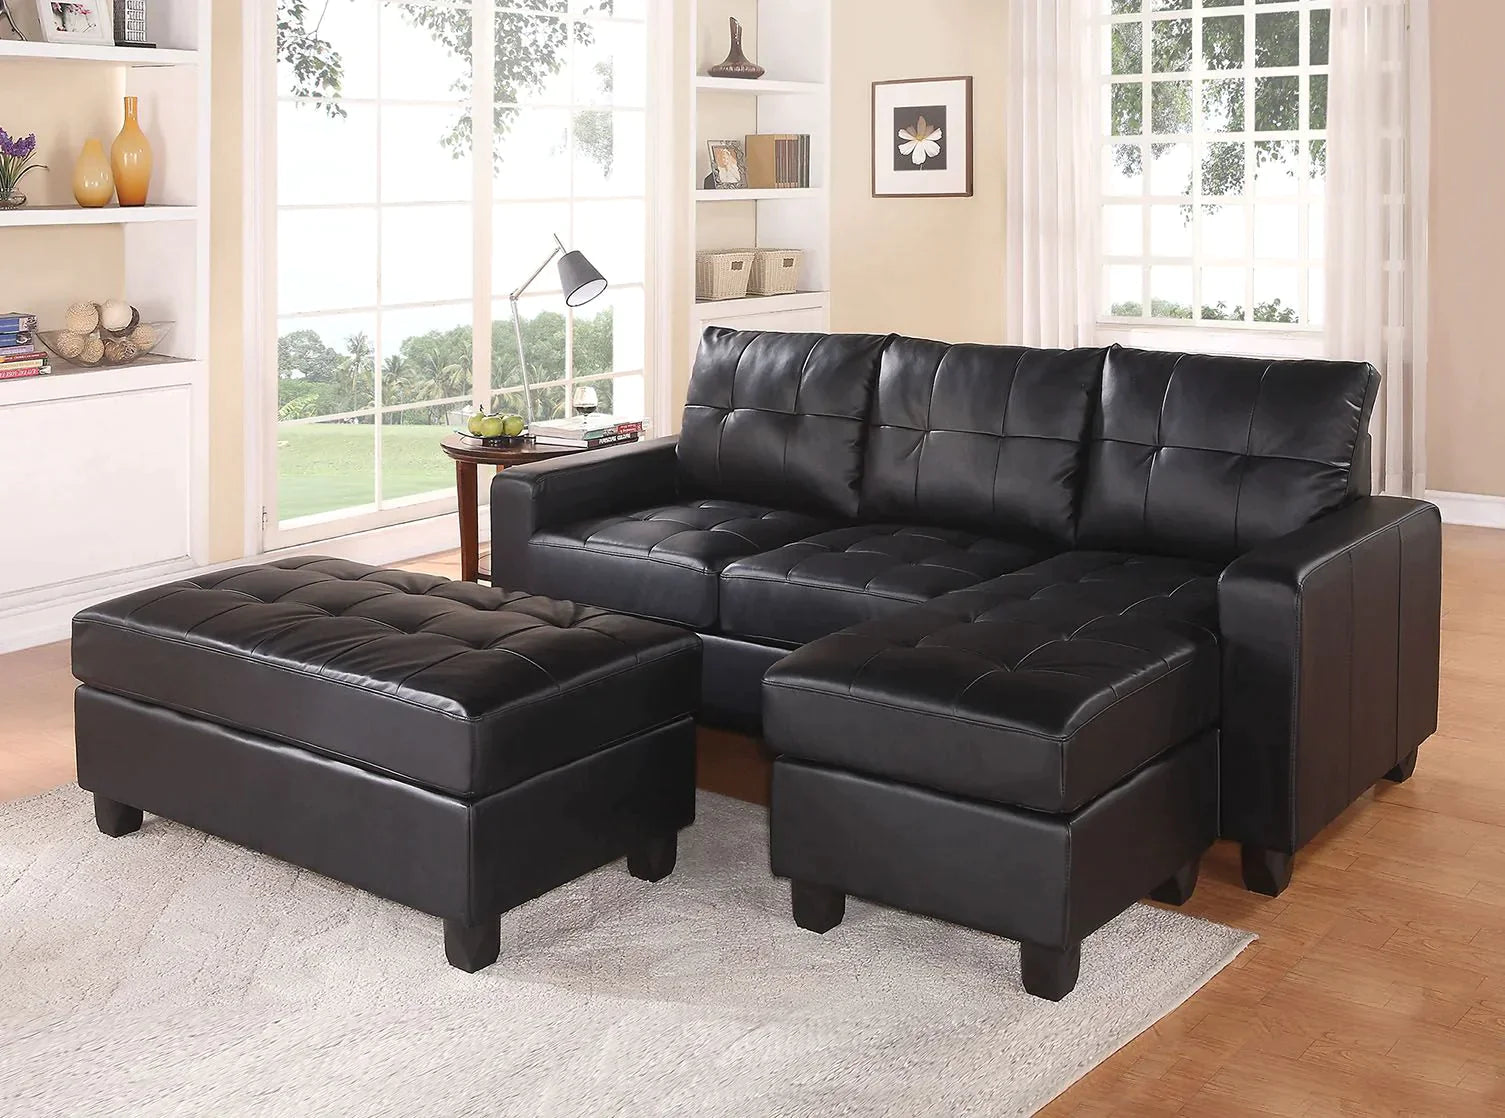 Lyssa Black Bonded Leather Match Sectional Sofa Model 51215 By ACME Furniture